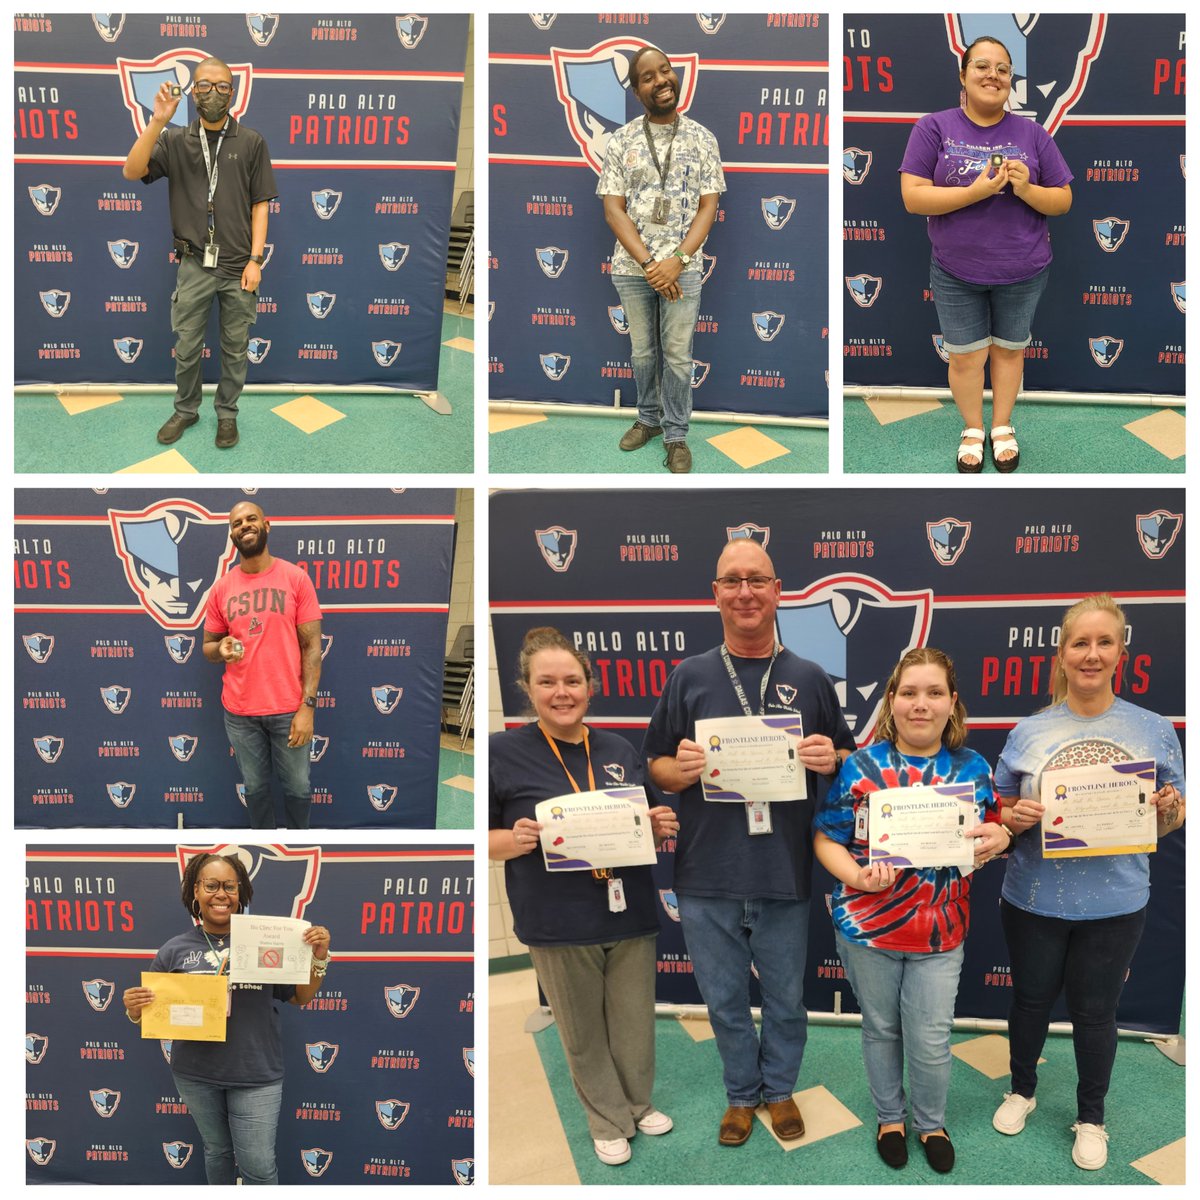 A great way to end the 23-24 school year with service and staff awards celebration!!! Until next year Patriots….enjoy your summer! #wearekisd #andstillwerise